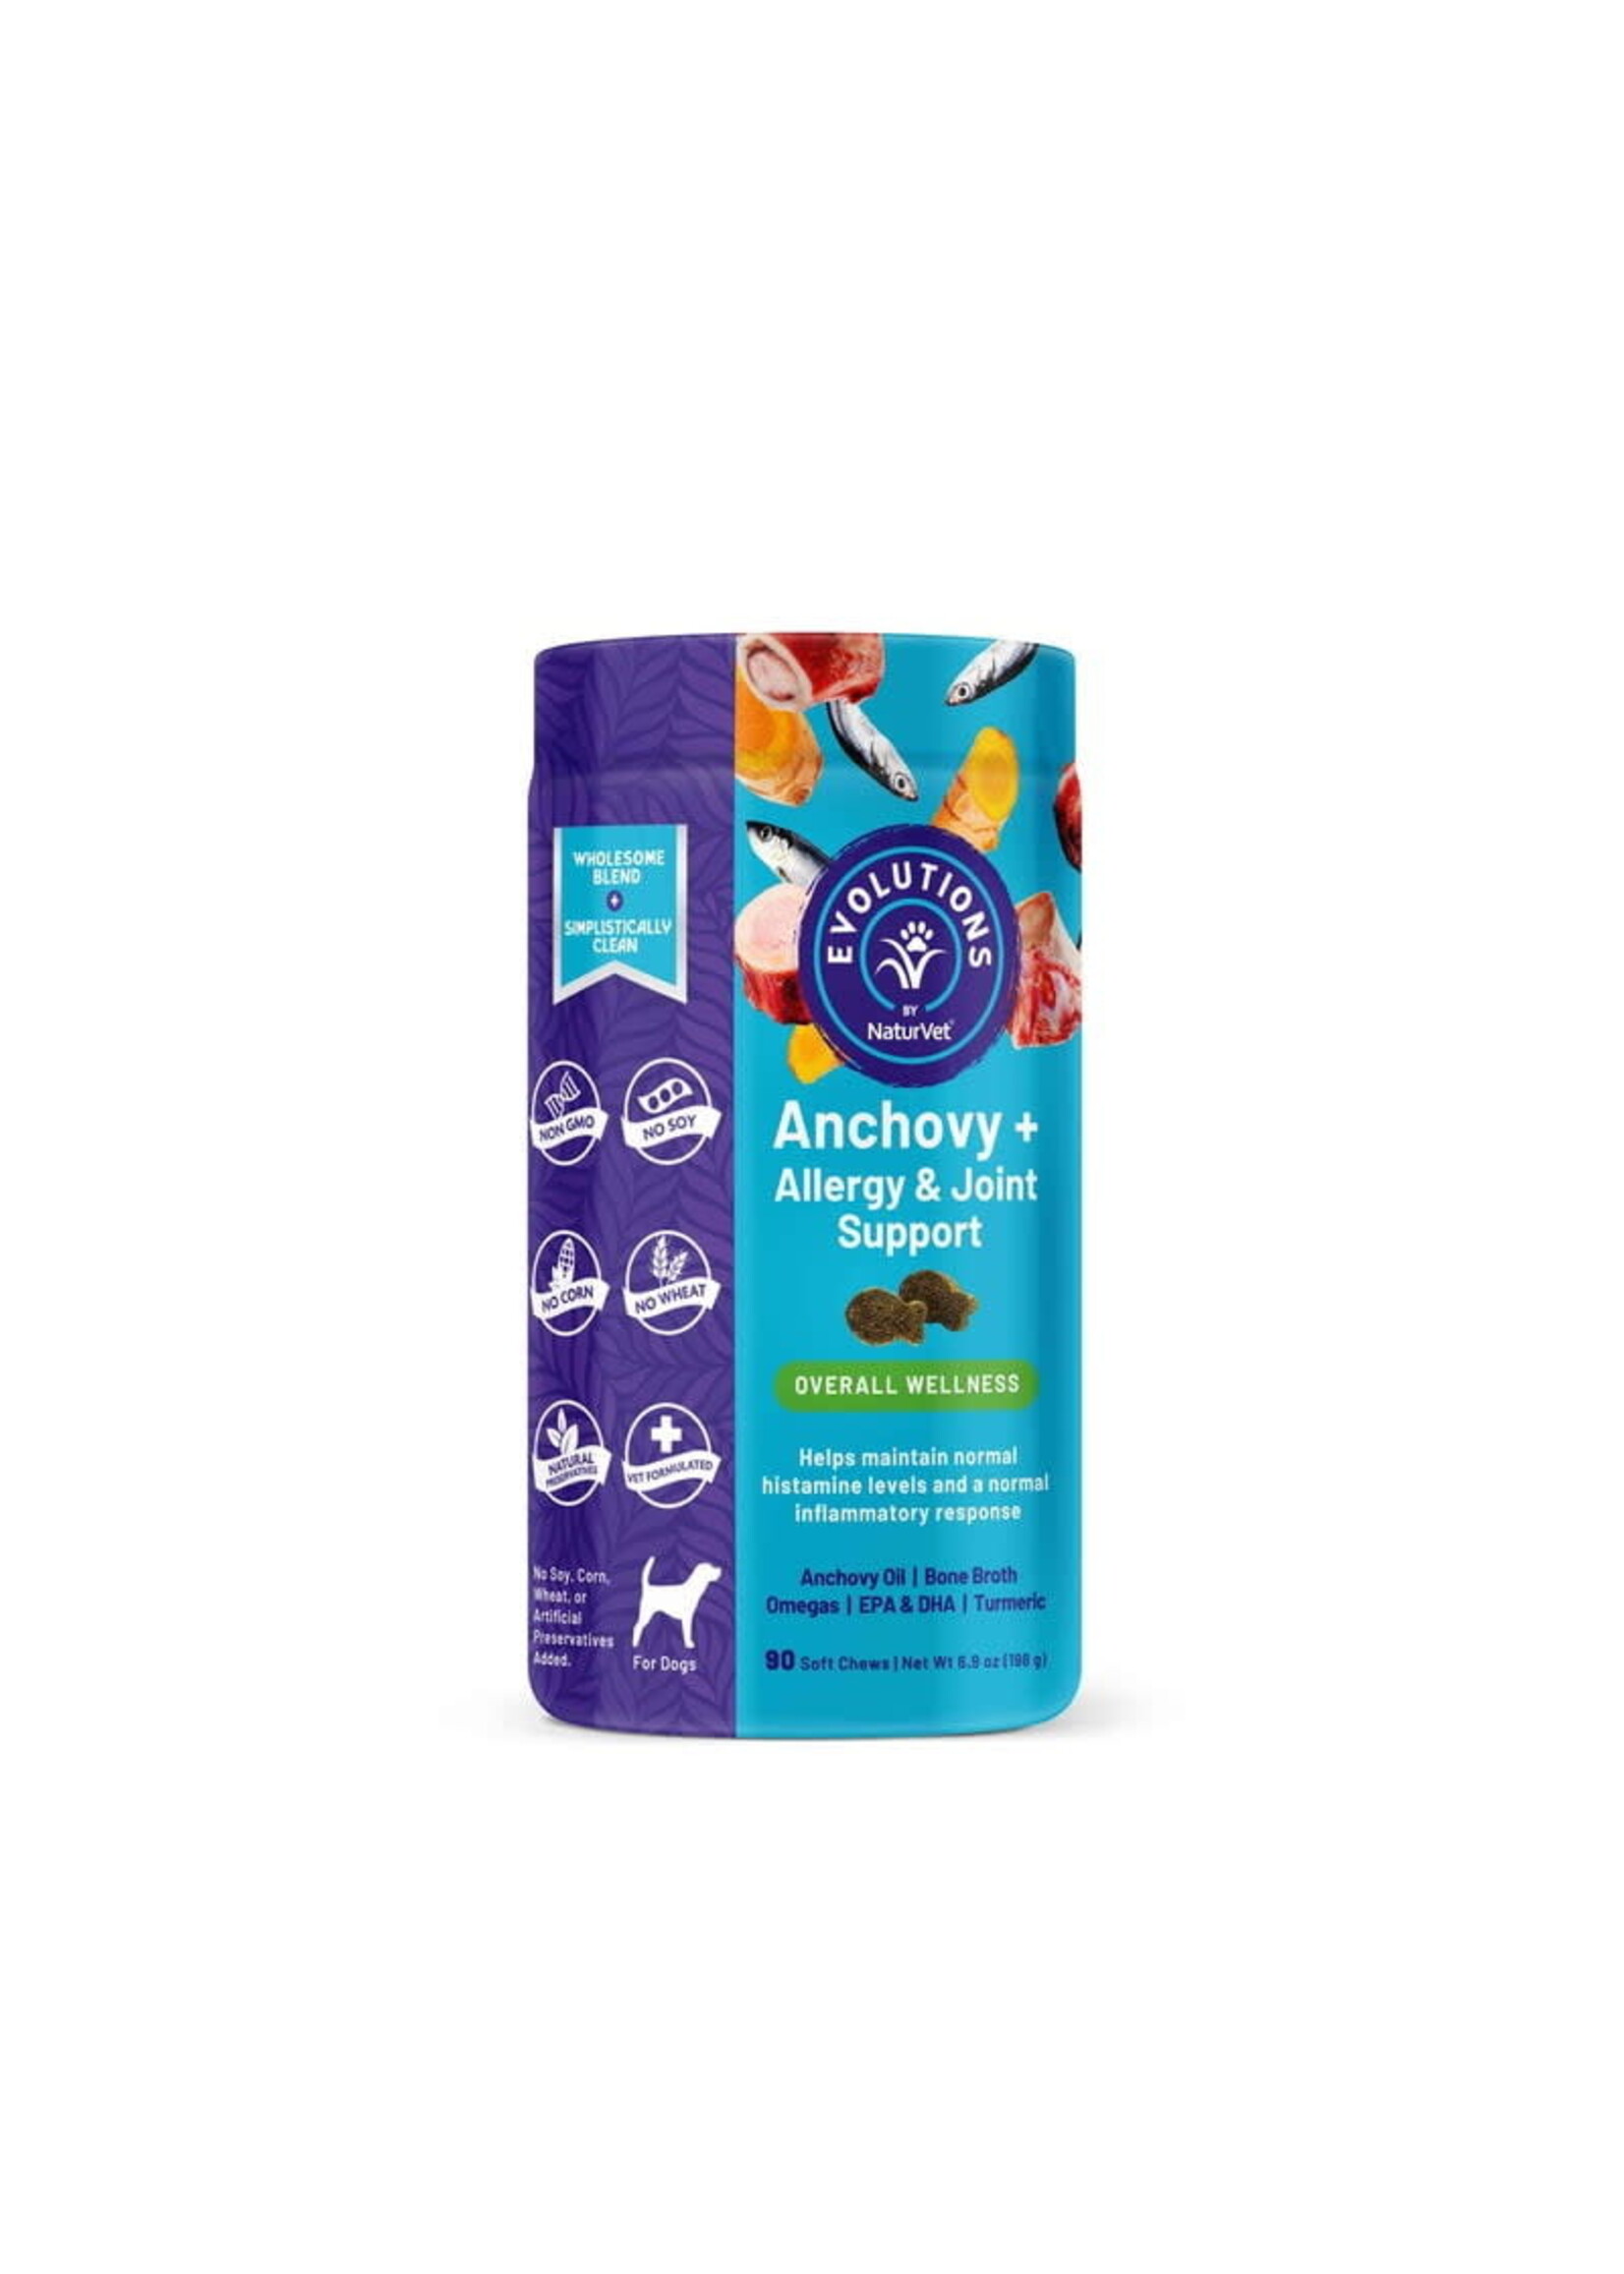 NaturVet NaturVet Evolutions Anchovy + Allergy & Joint Support Soft Chews 90ct